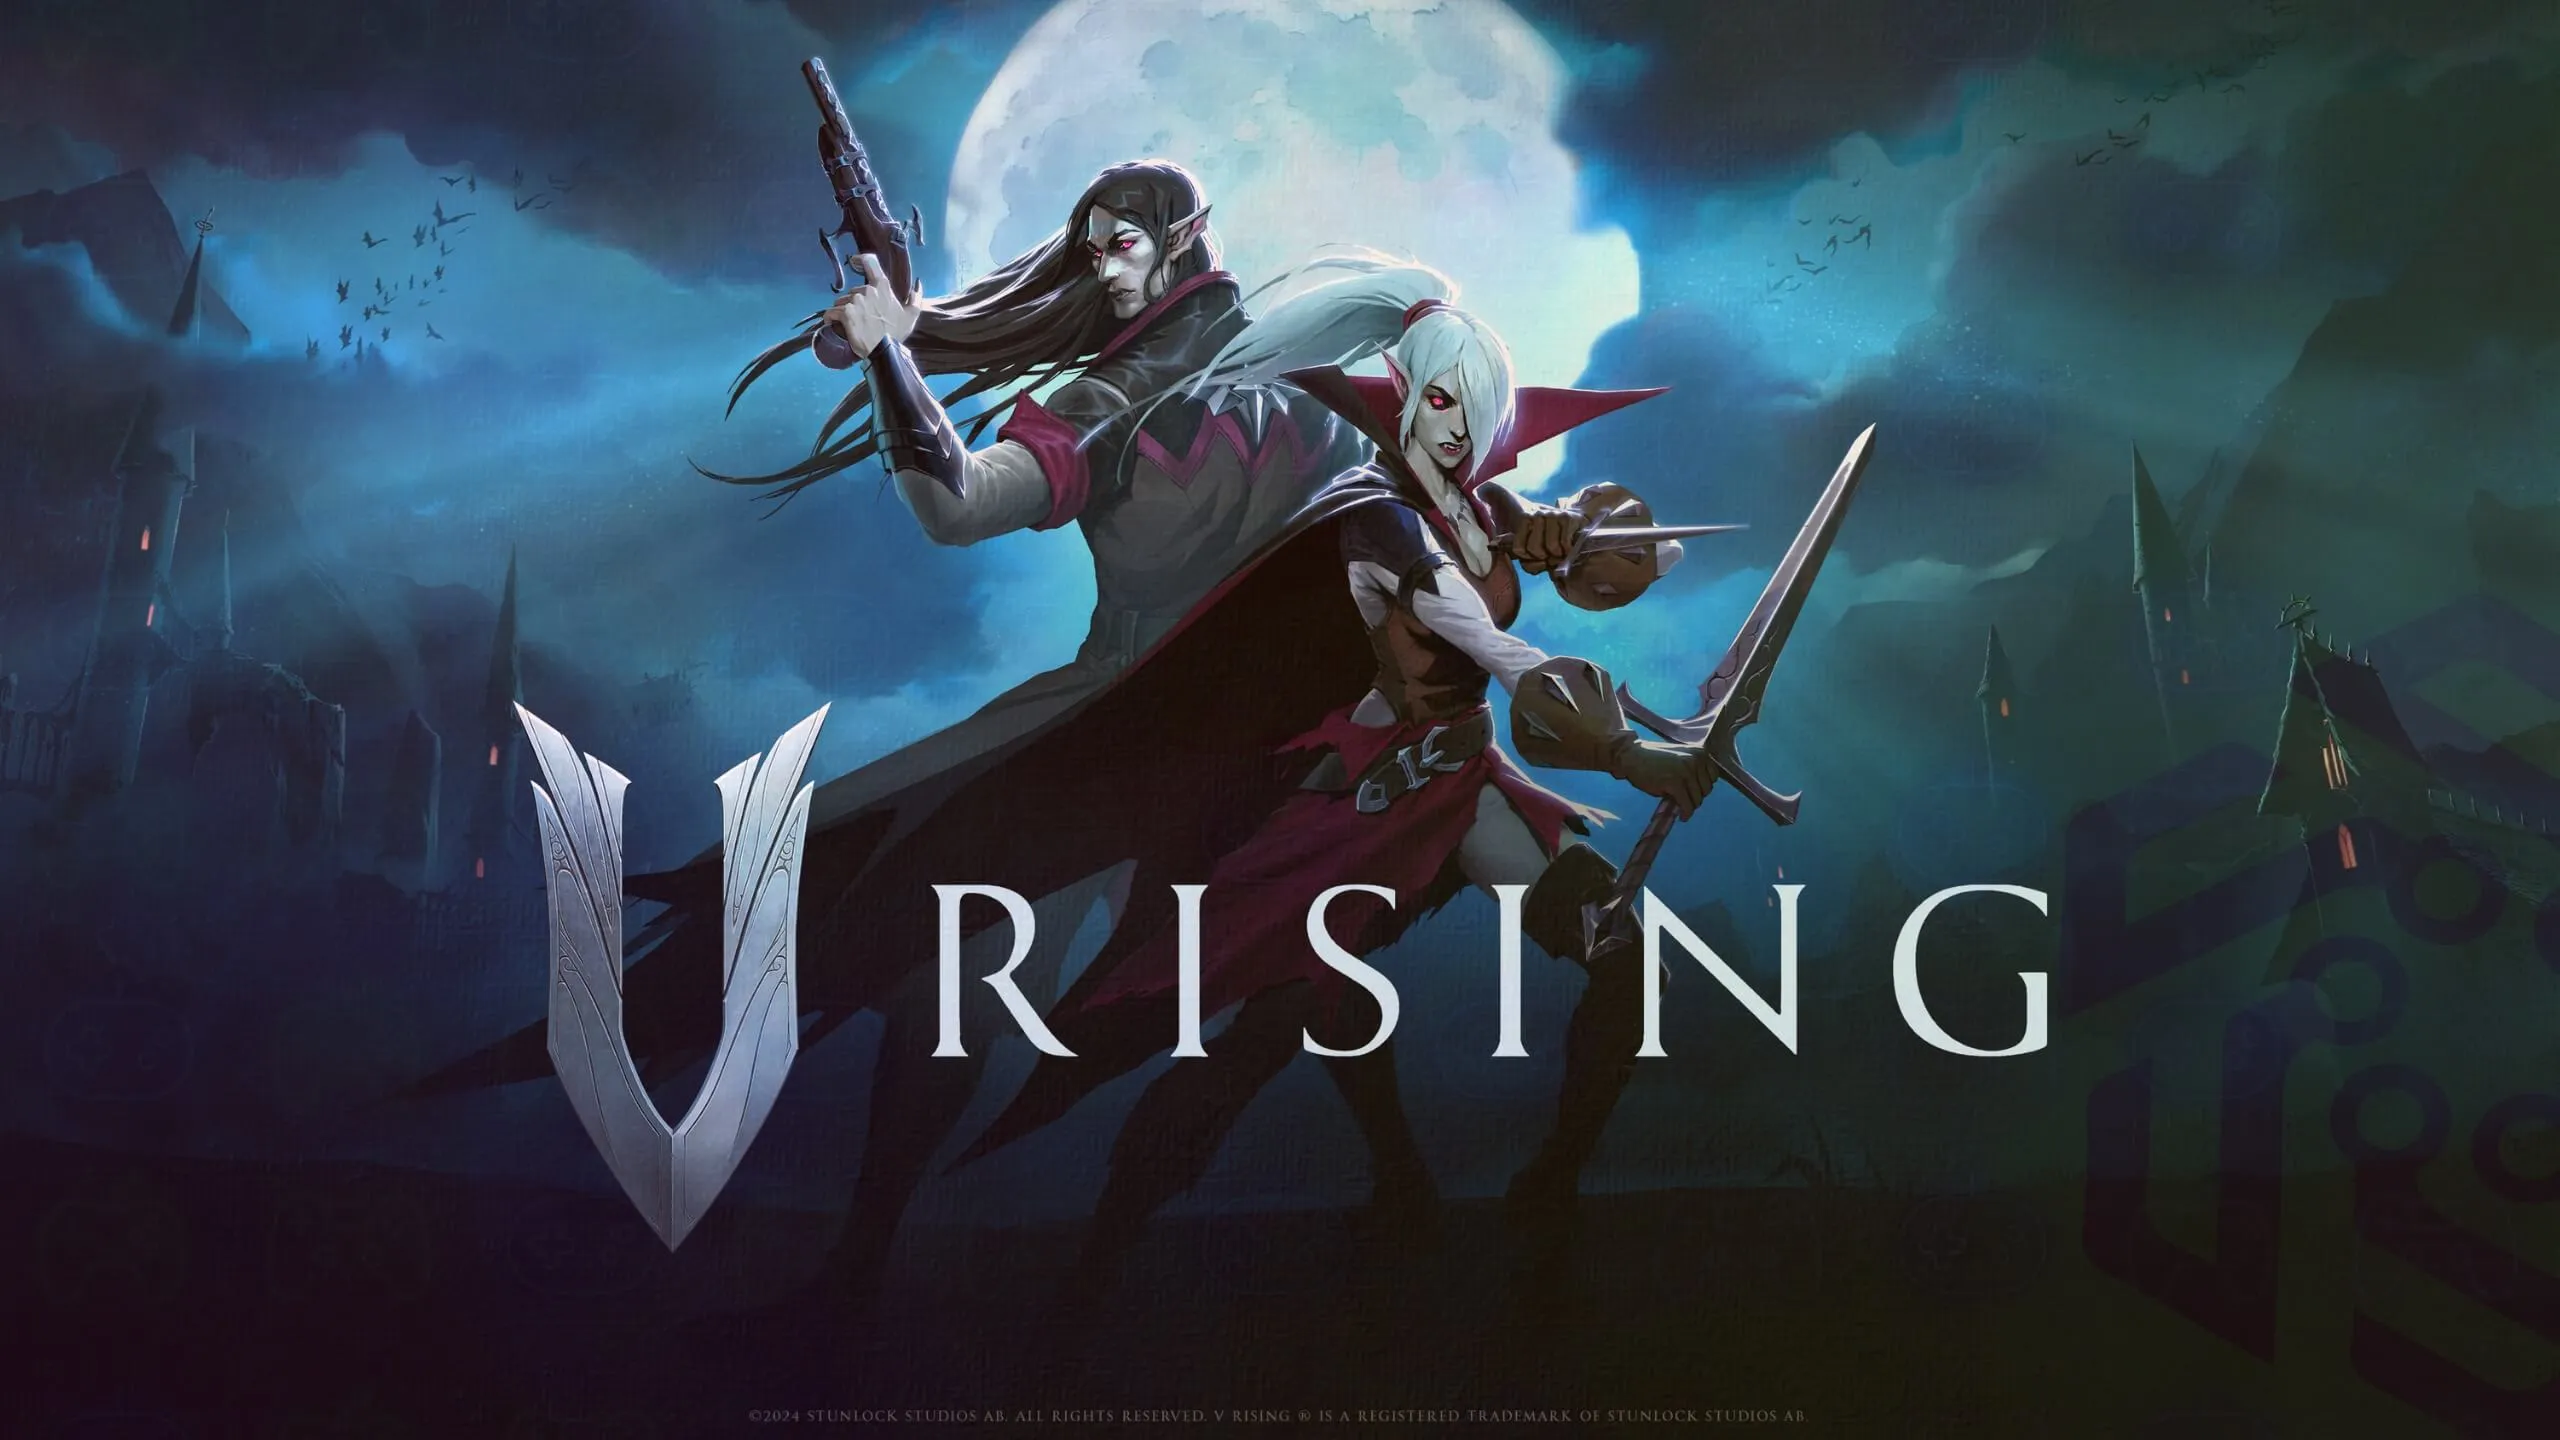 V rising game main image with characters